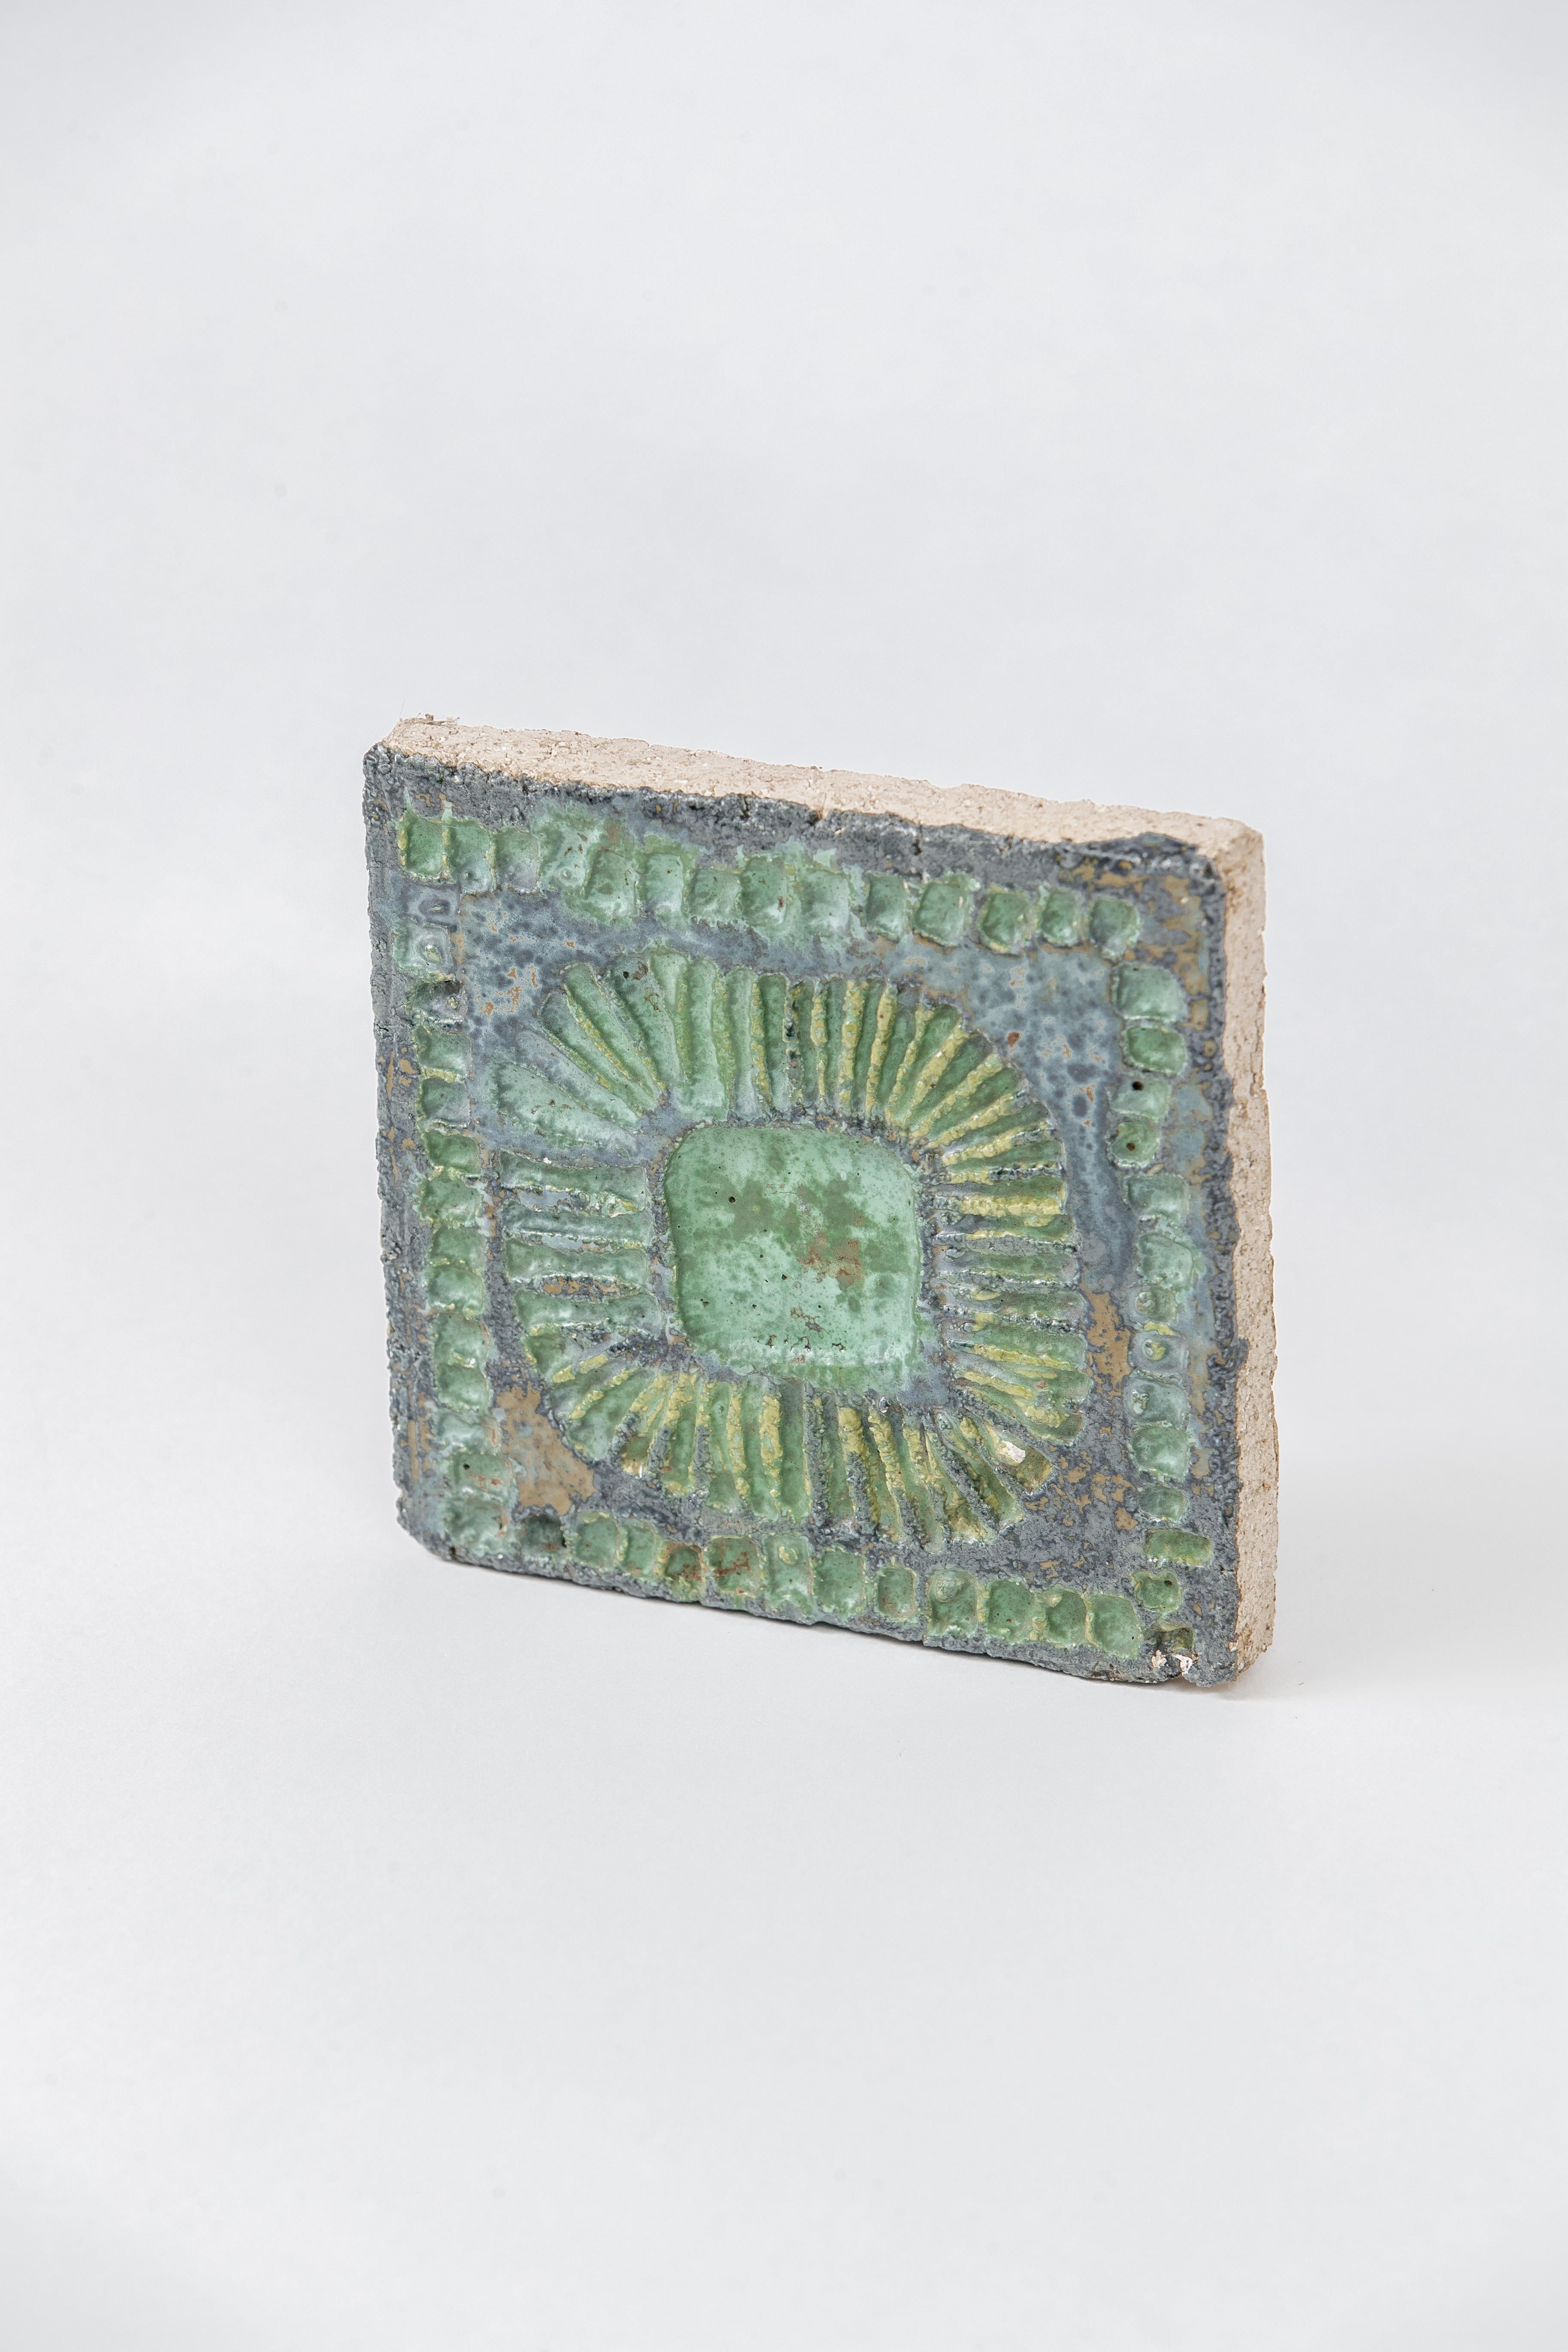 Danish tile that could be used as a paperweight, wonderful details and glaze.